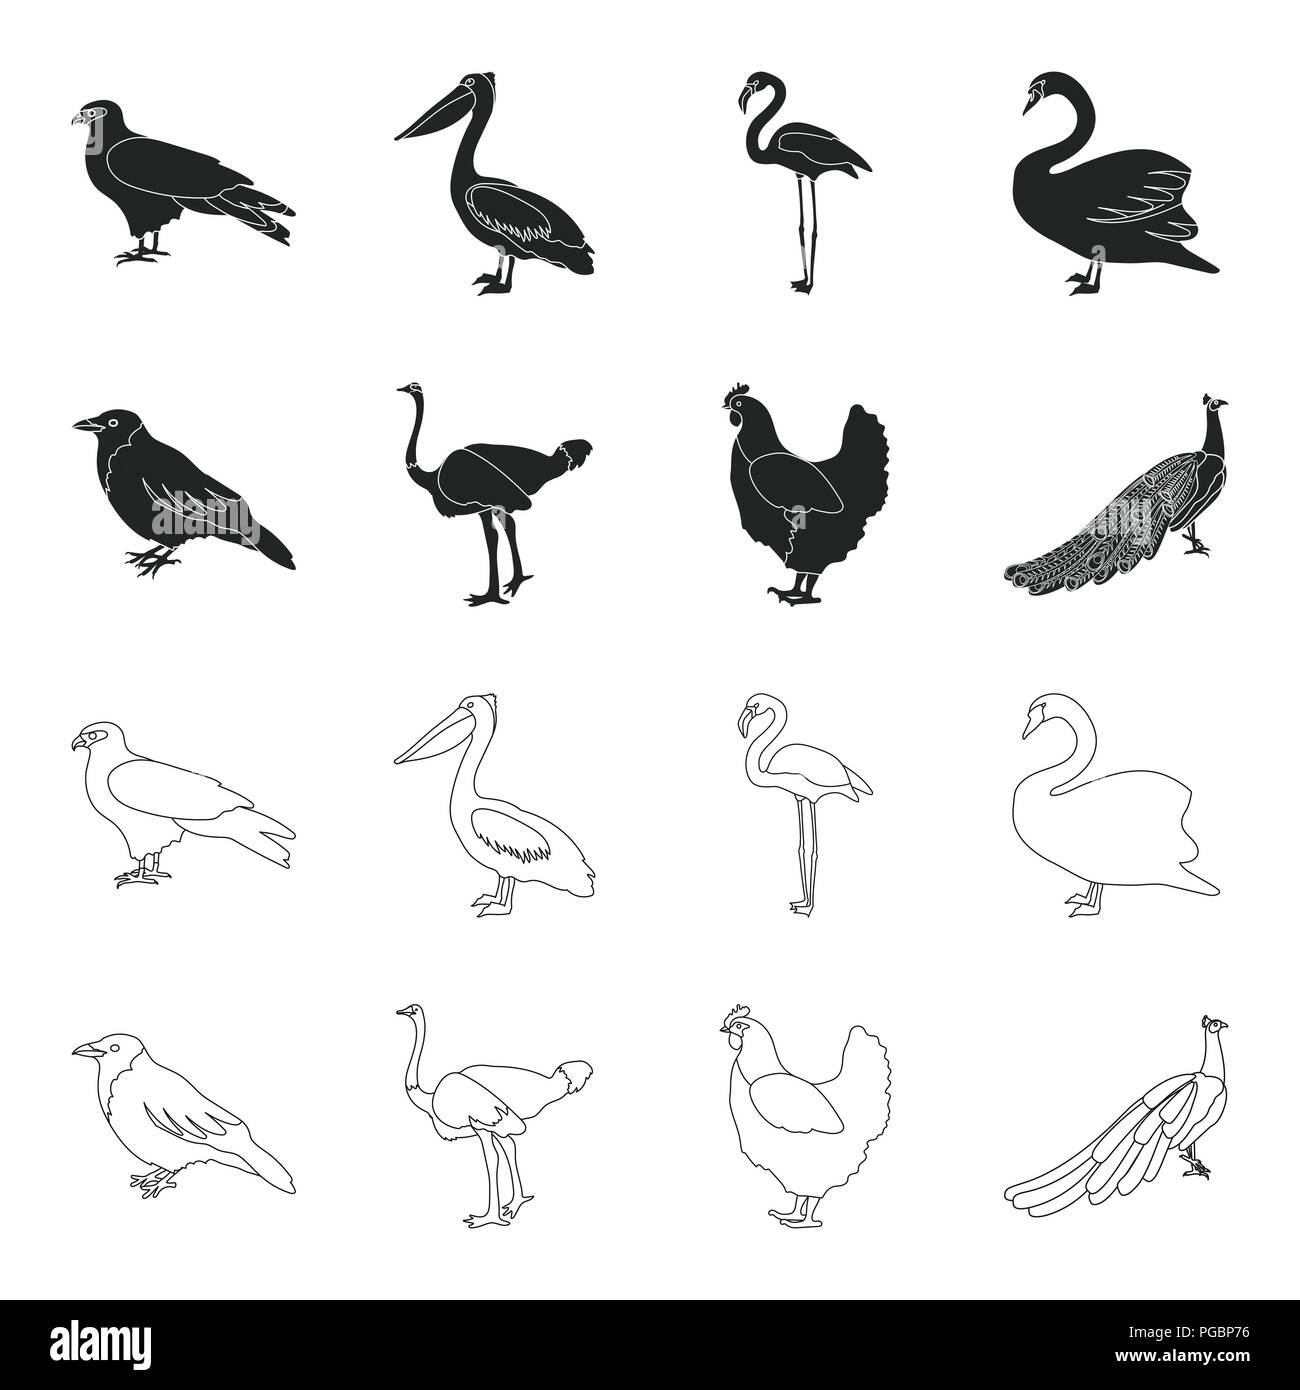 Crow, ostrich, chicken, peacock. Birds set collection icons in black ...